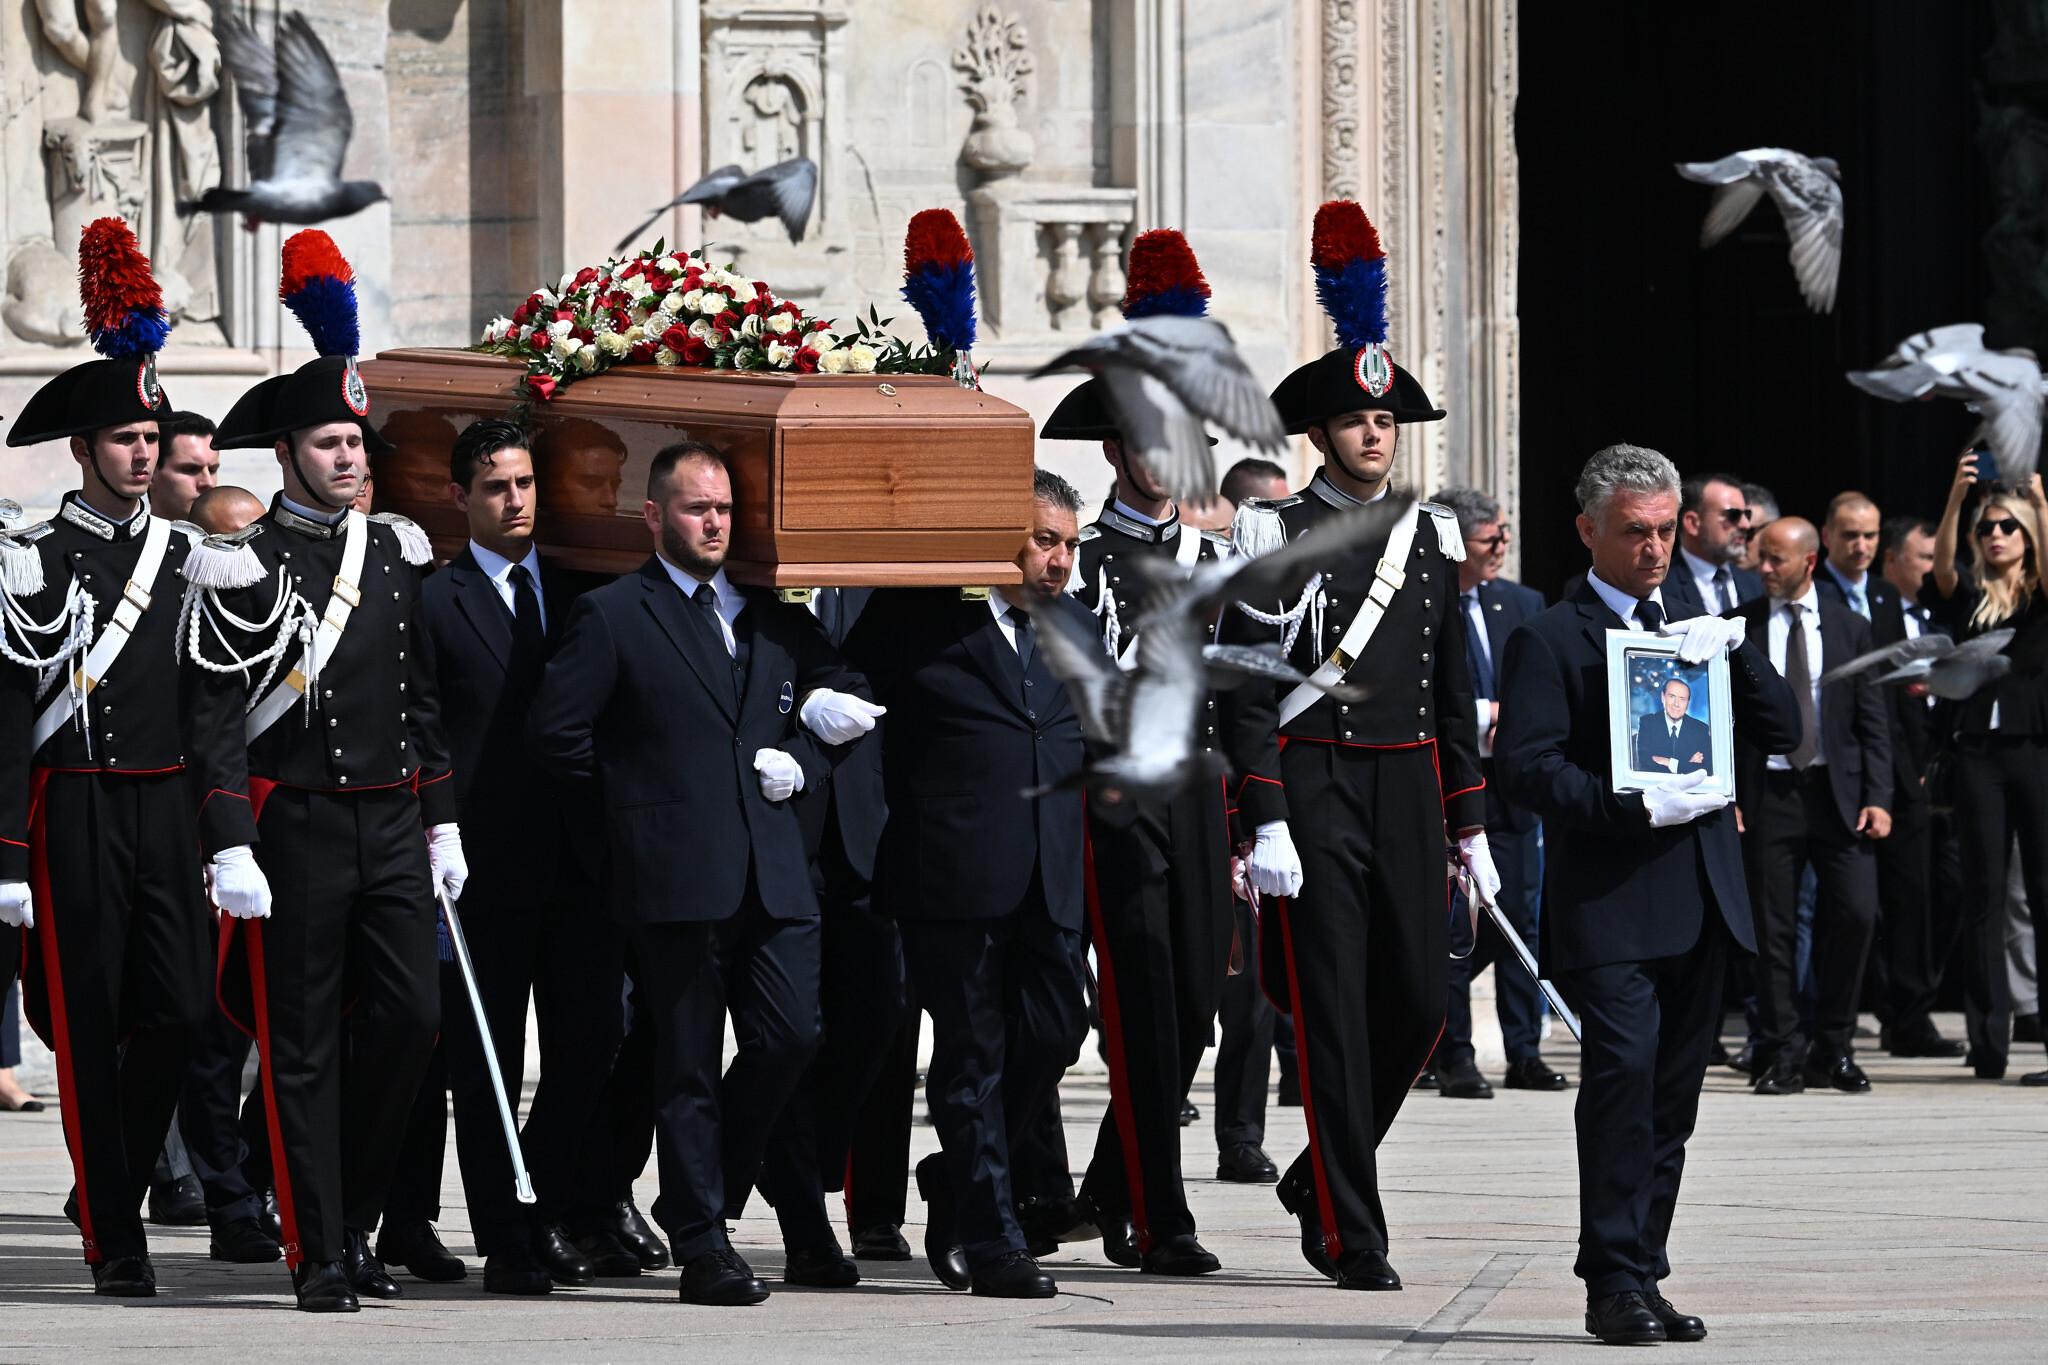 National day of mourning held in Italy for Berlusconis state funeral The Times of Israel pic